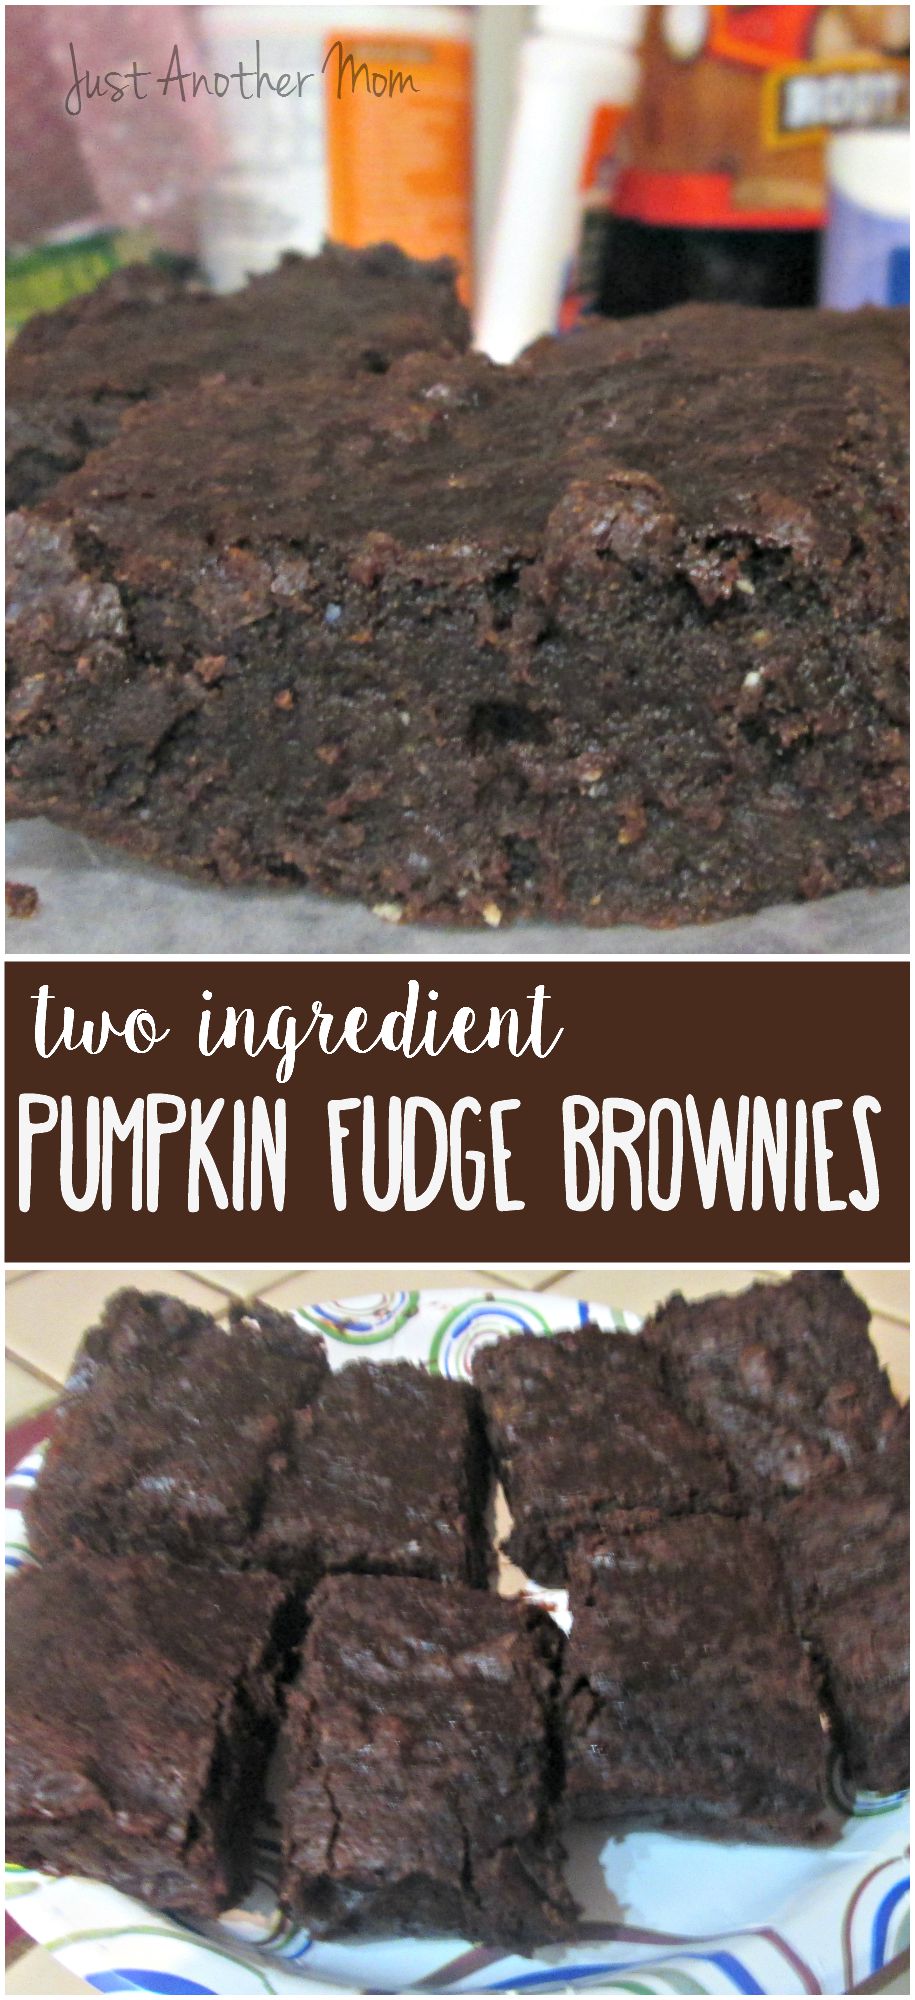 All you need are two ingredients for these delicious pumpkin fudge brownies.